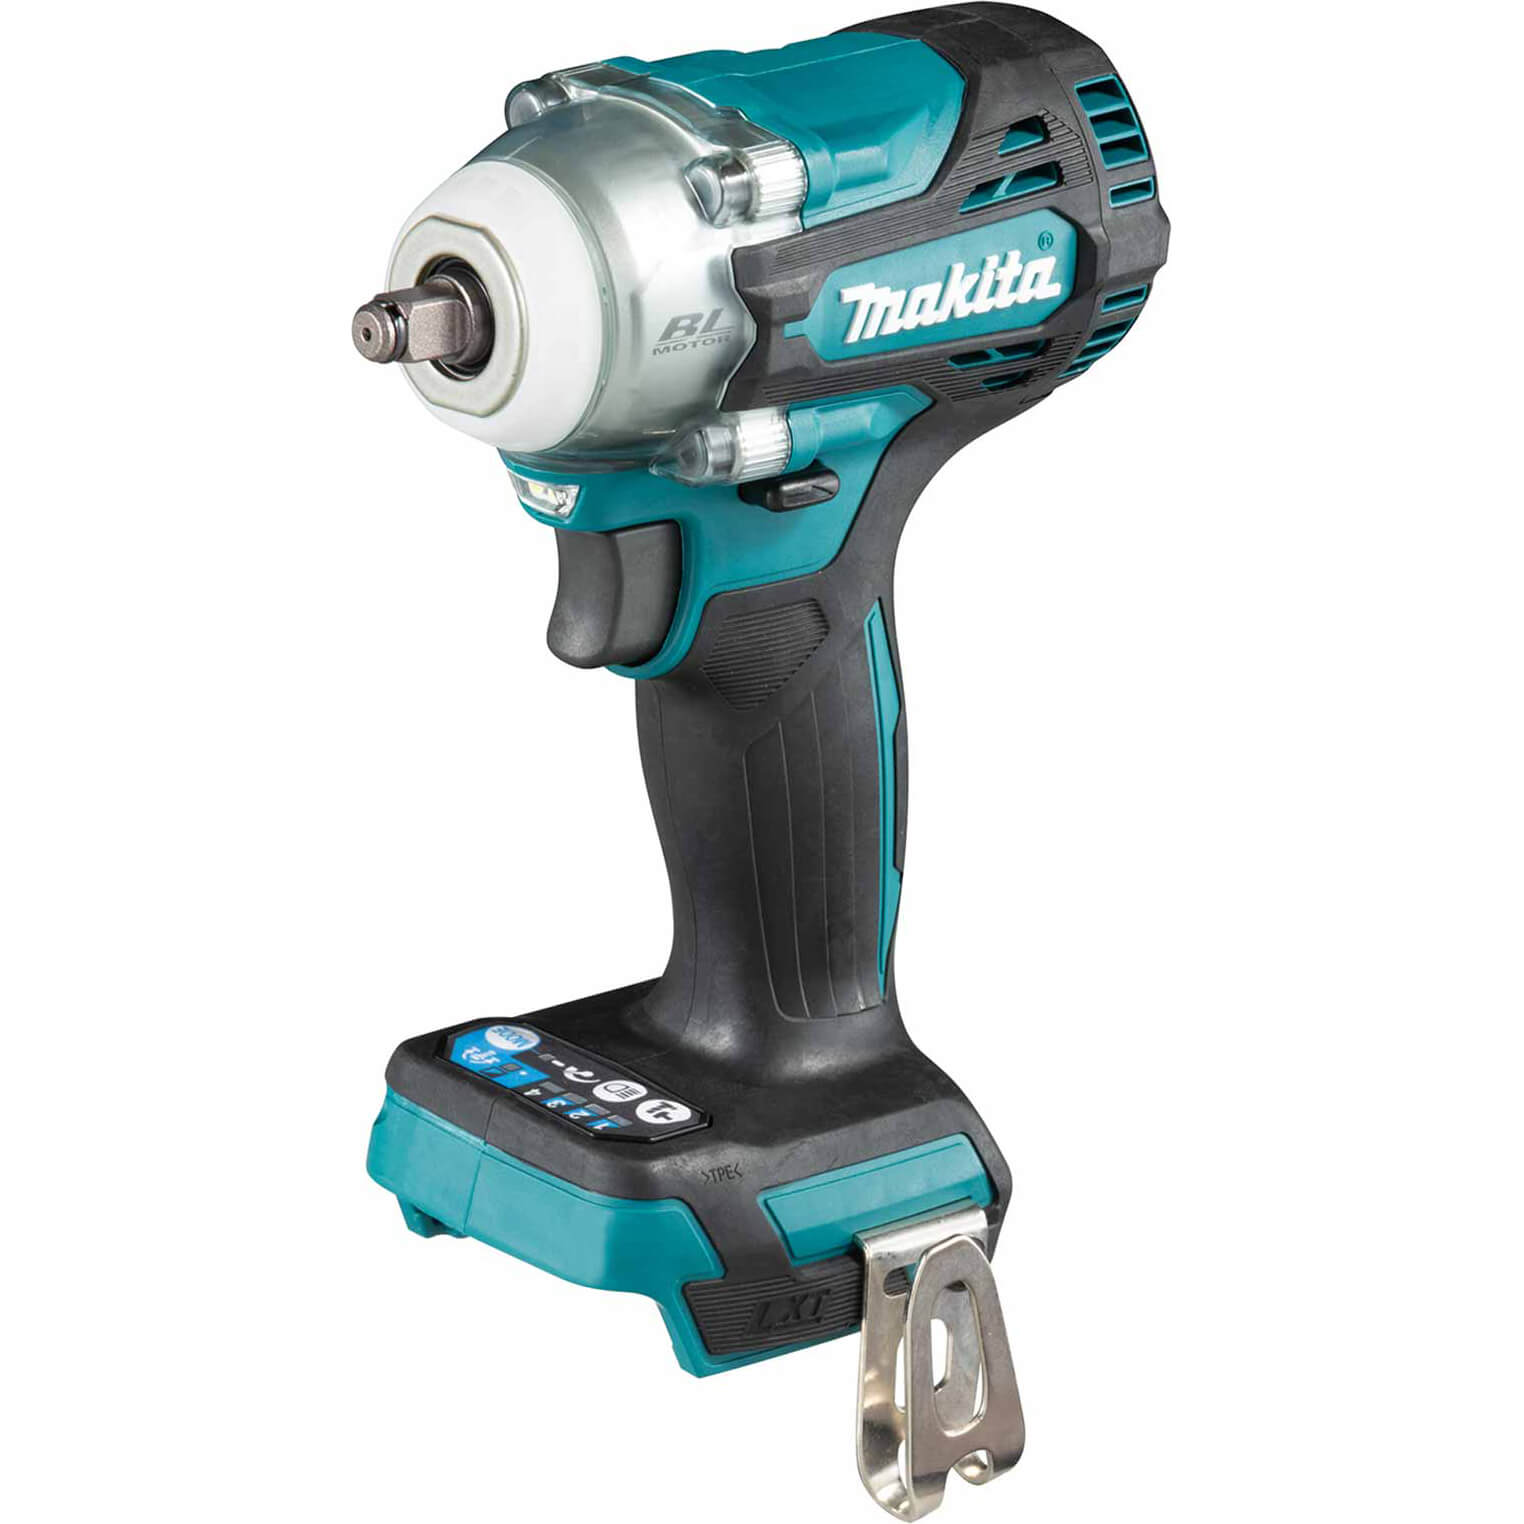 Image of Makita DTW302 18v LXT Cordless Brushless 3/8" Drive Impact Wrench No Batteries No Charger No Case